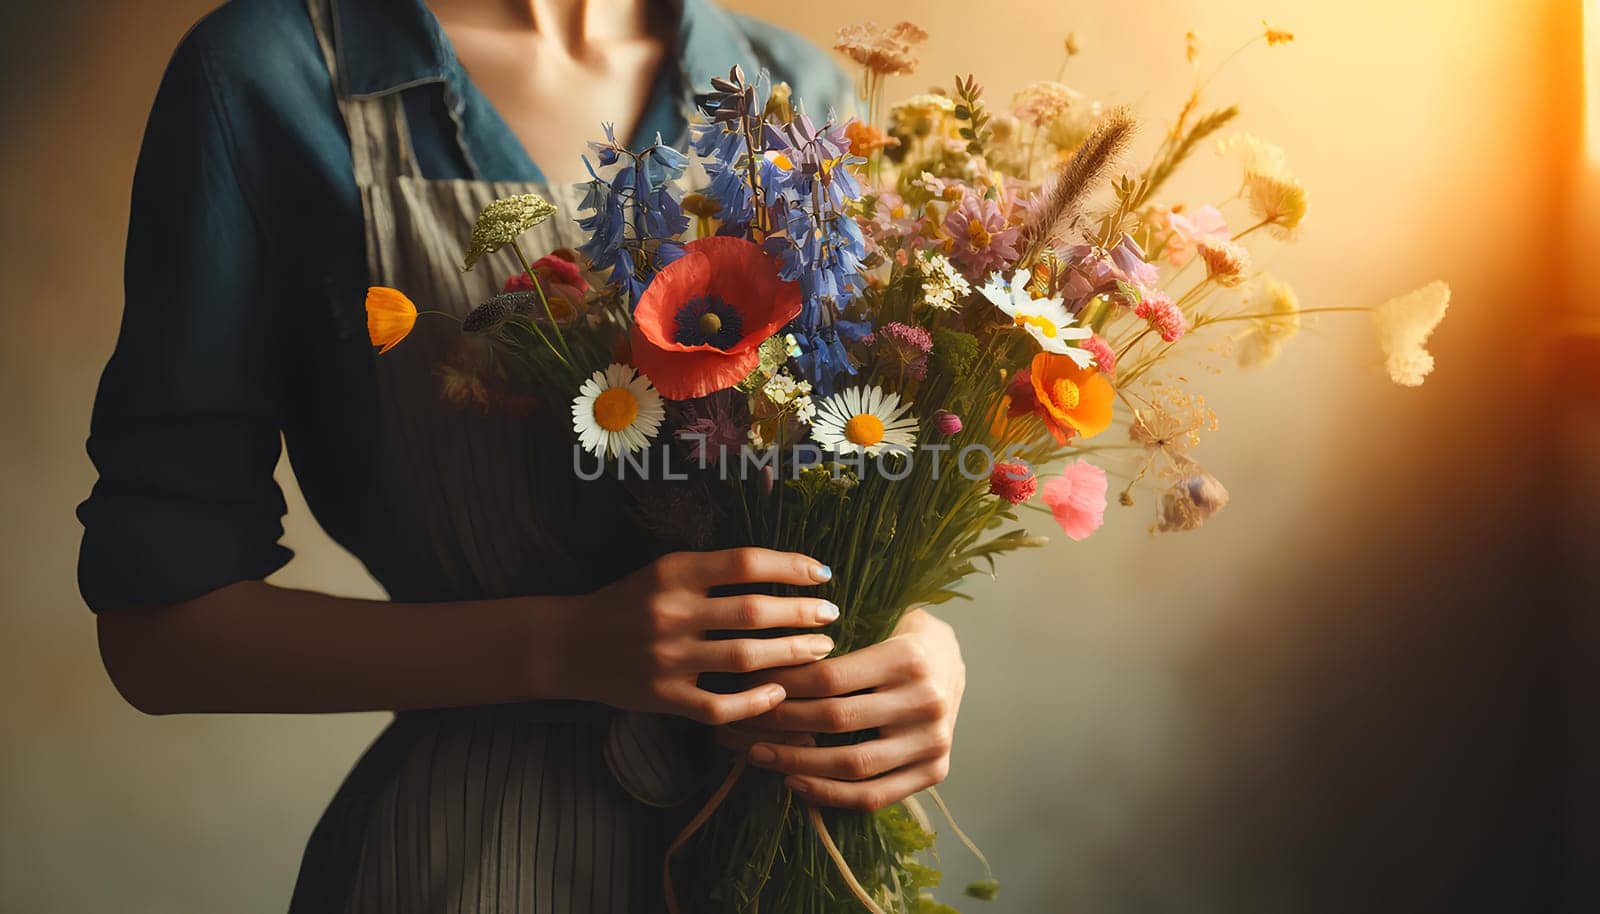 Woman with a bouquet of wild flowers in her hands, close-up.